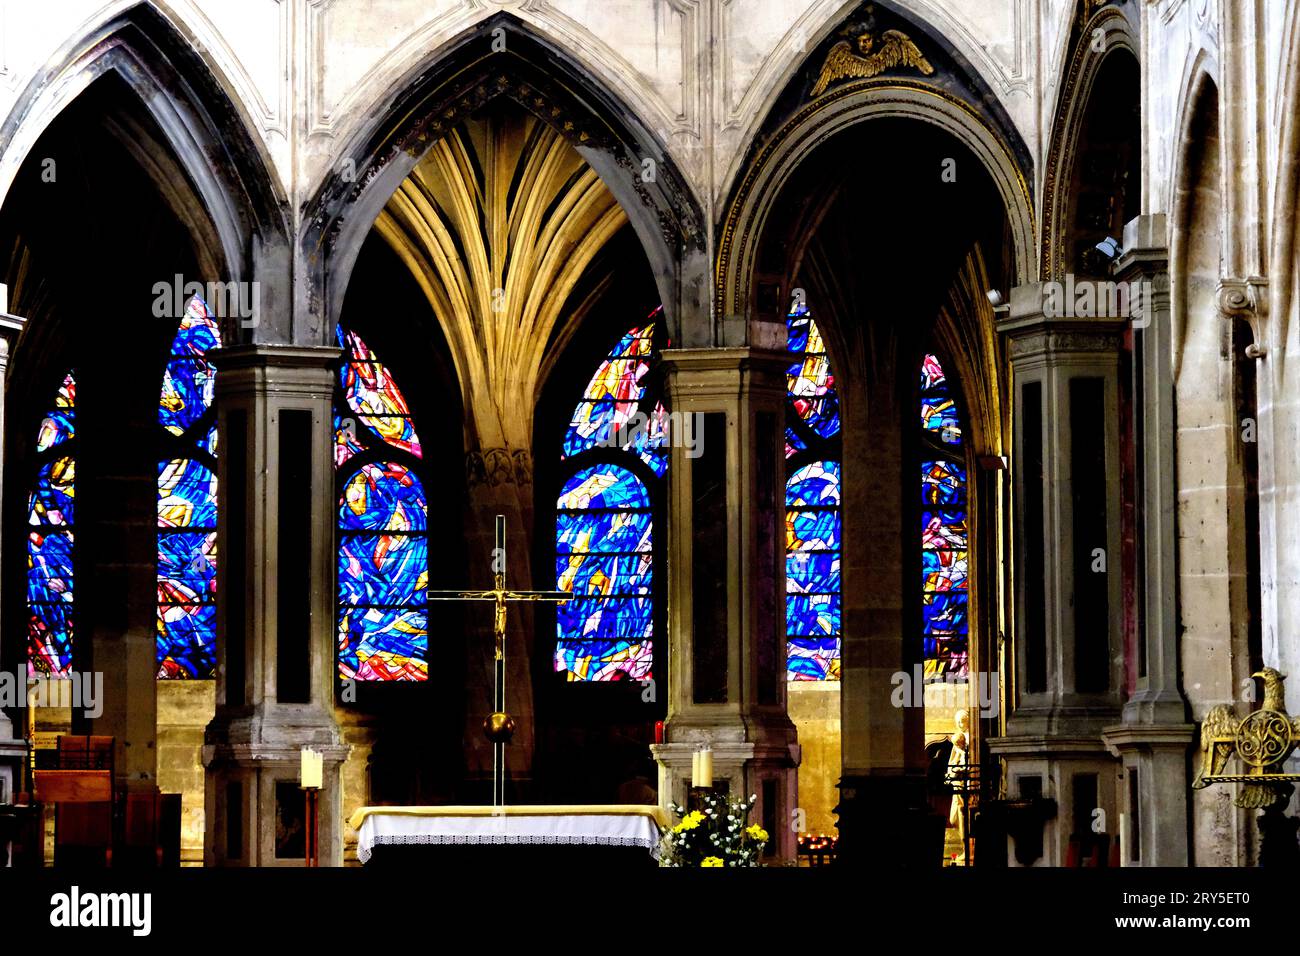 Altar and stained glass windows in Saint Severin church in Paris France Stock Photo